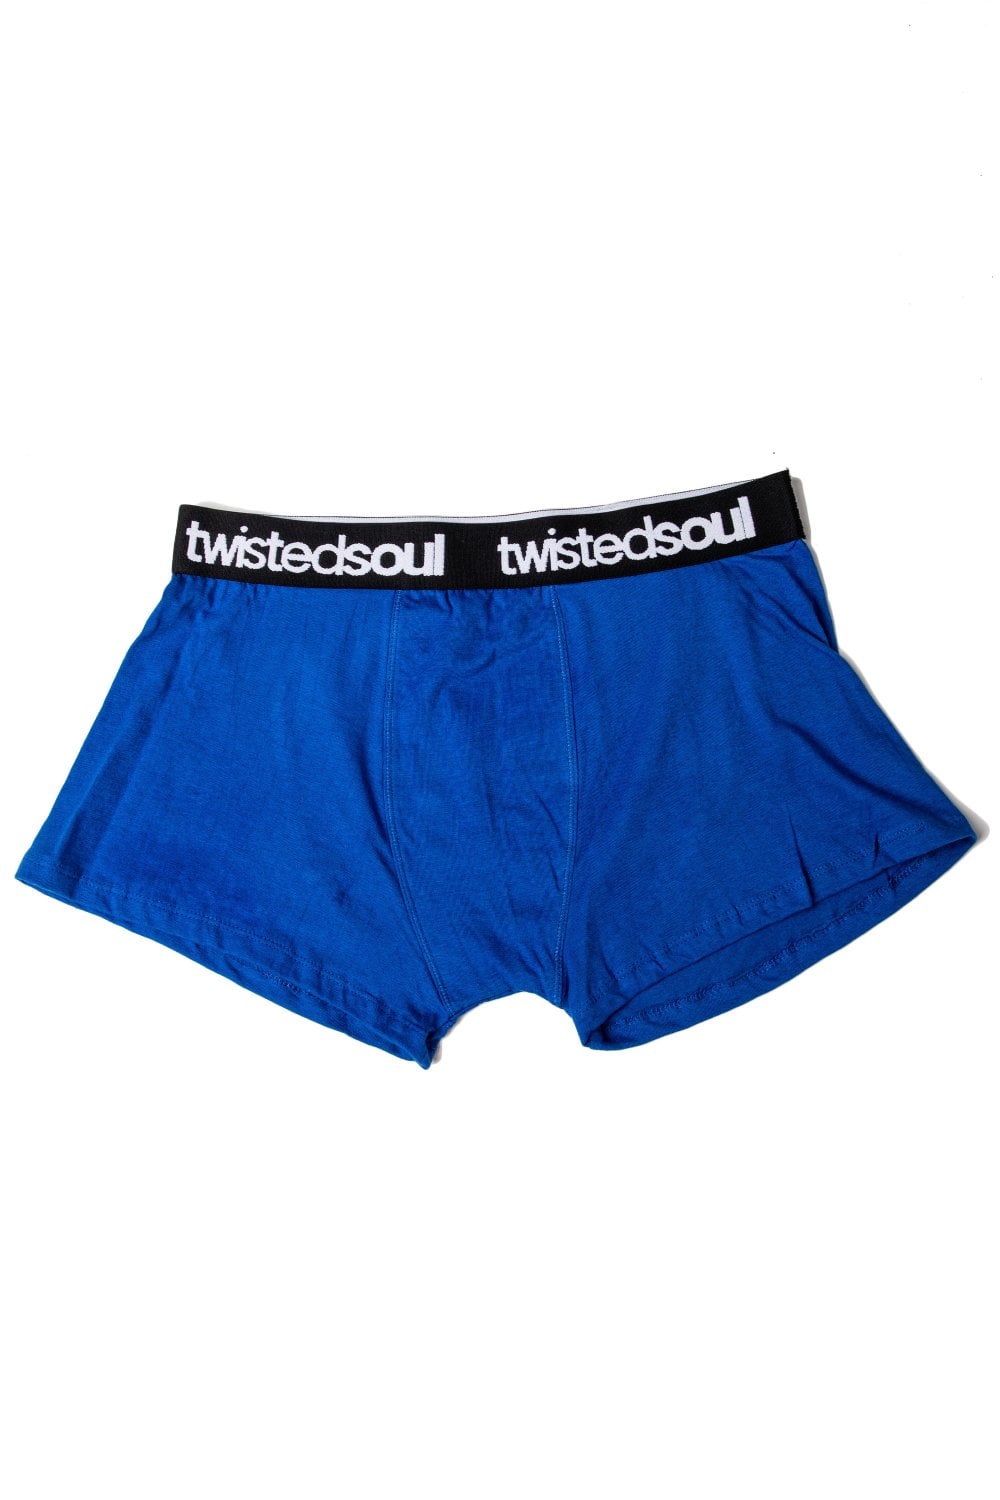 3 Pack Of Boxers - Twisted Soul | Men's Clothing